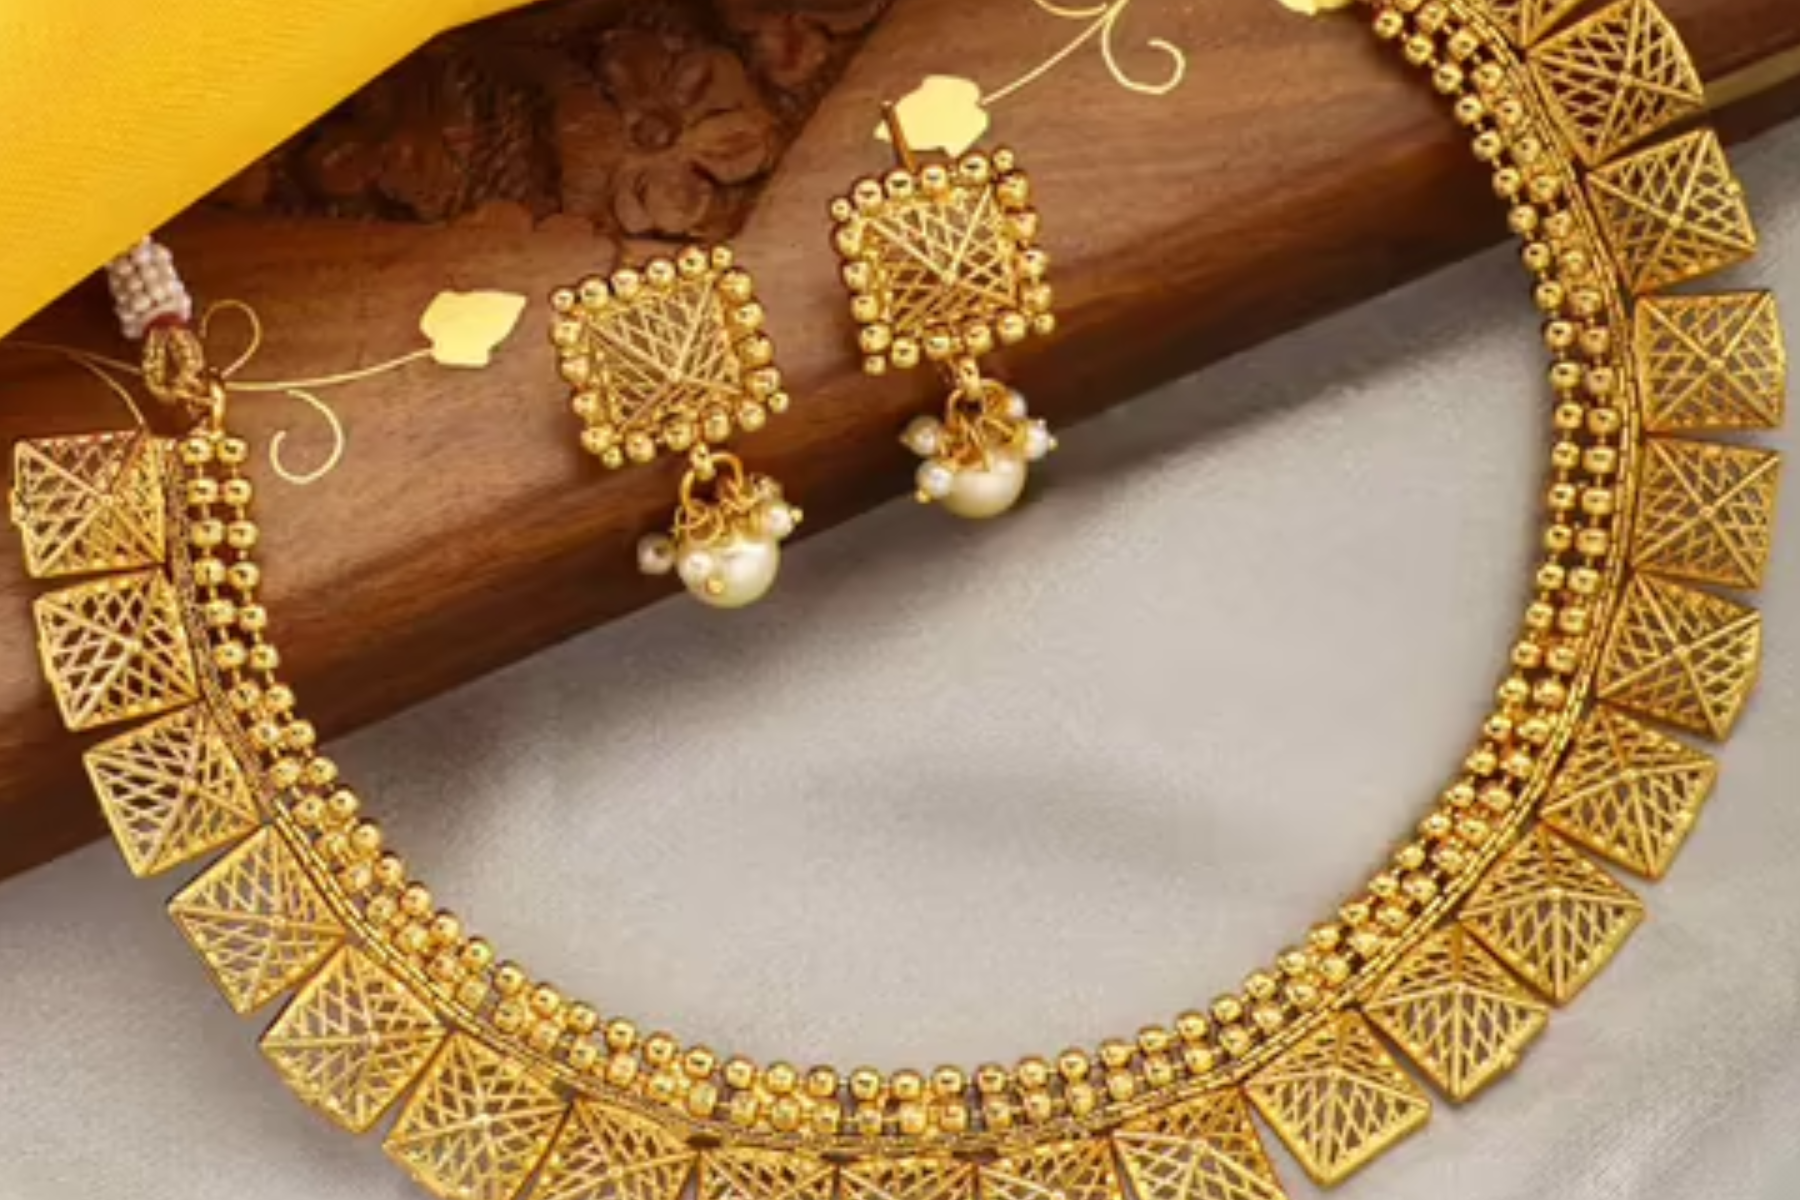 Traditional Gold Jewelry - A Symbol Of Wealth And Status